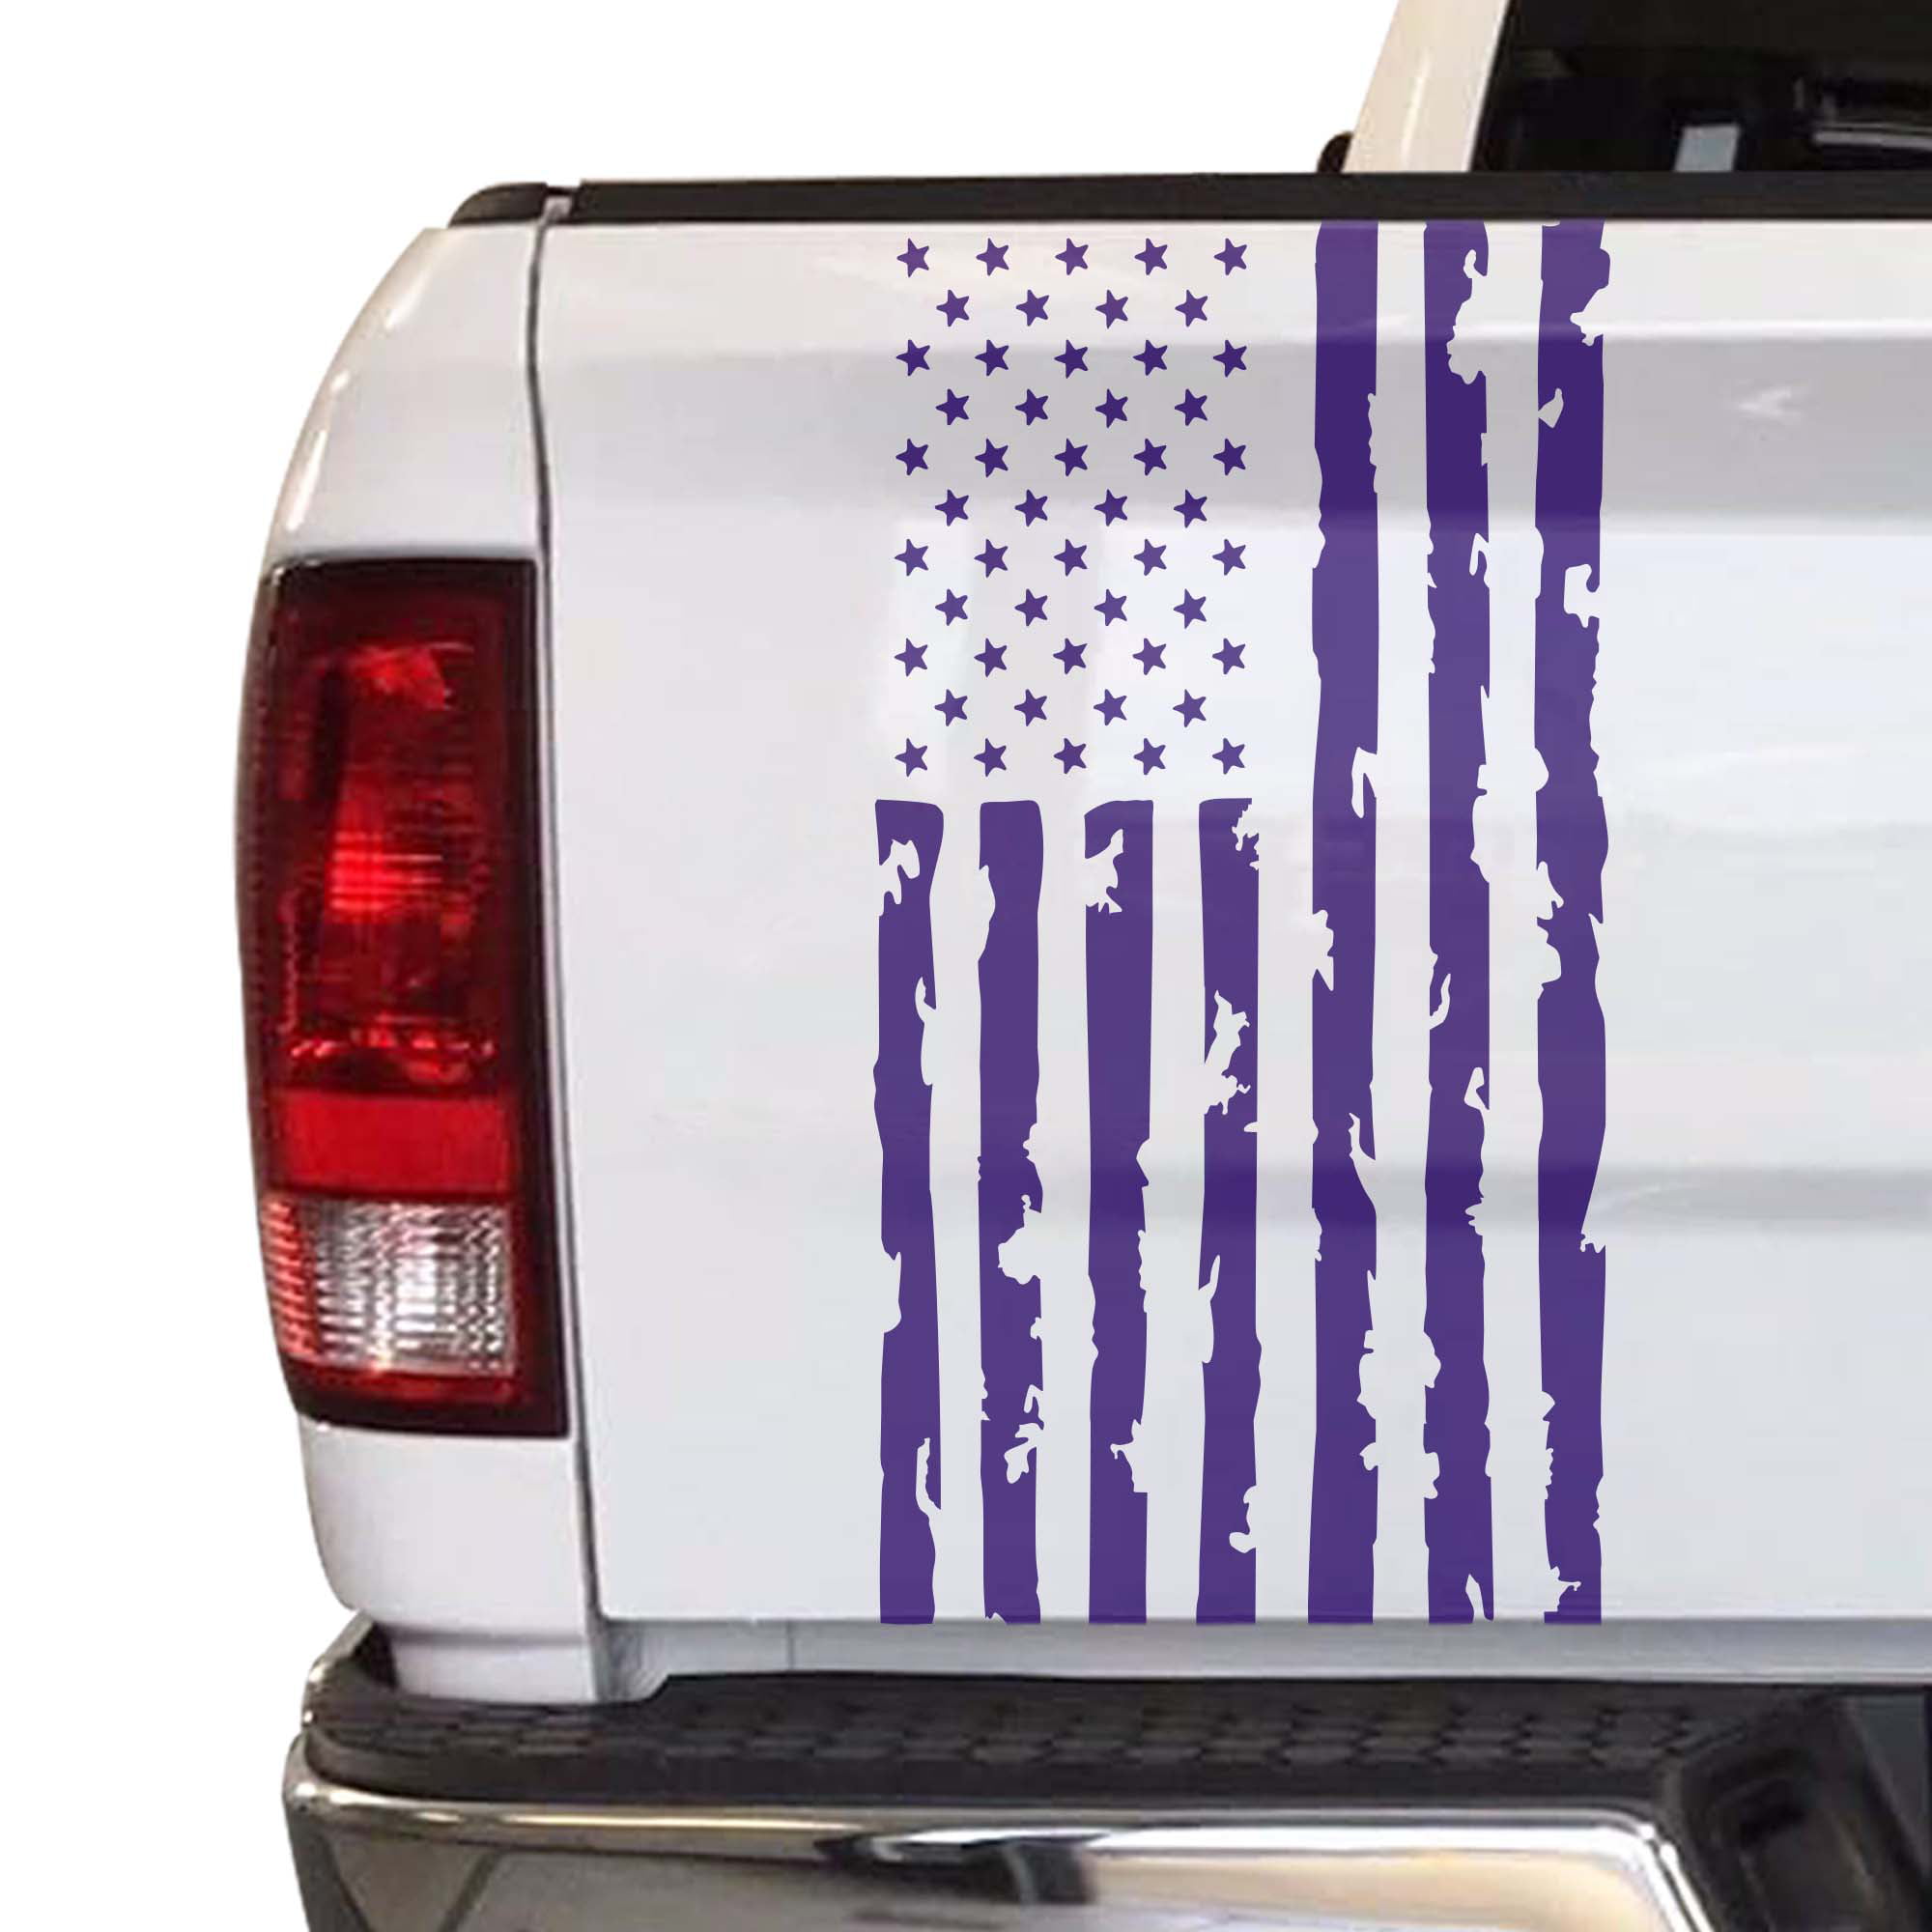 American Flag Distressed Retro Truck Tailgate Decal Graphics Rear Vinyl Wrap